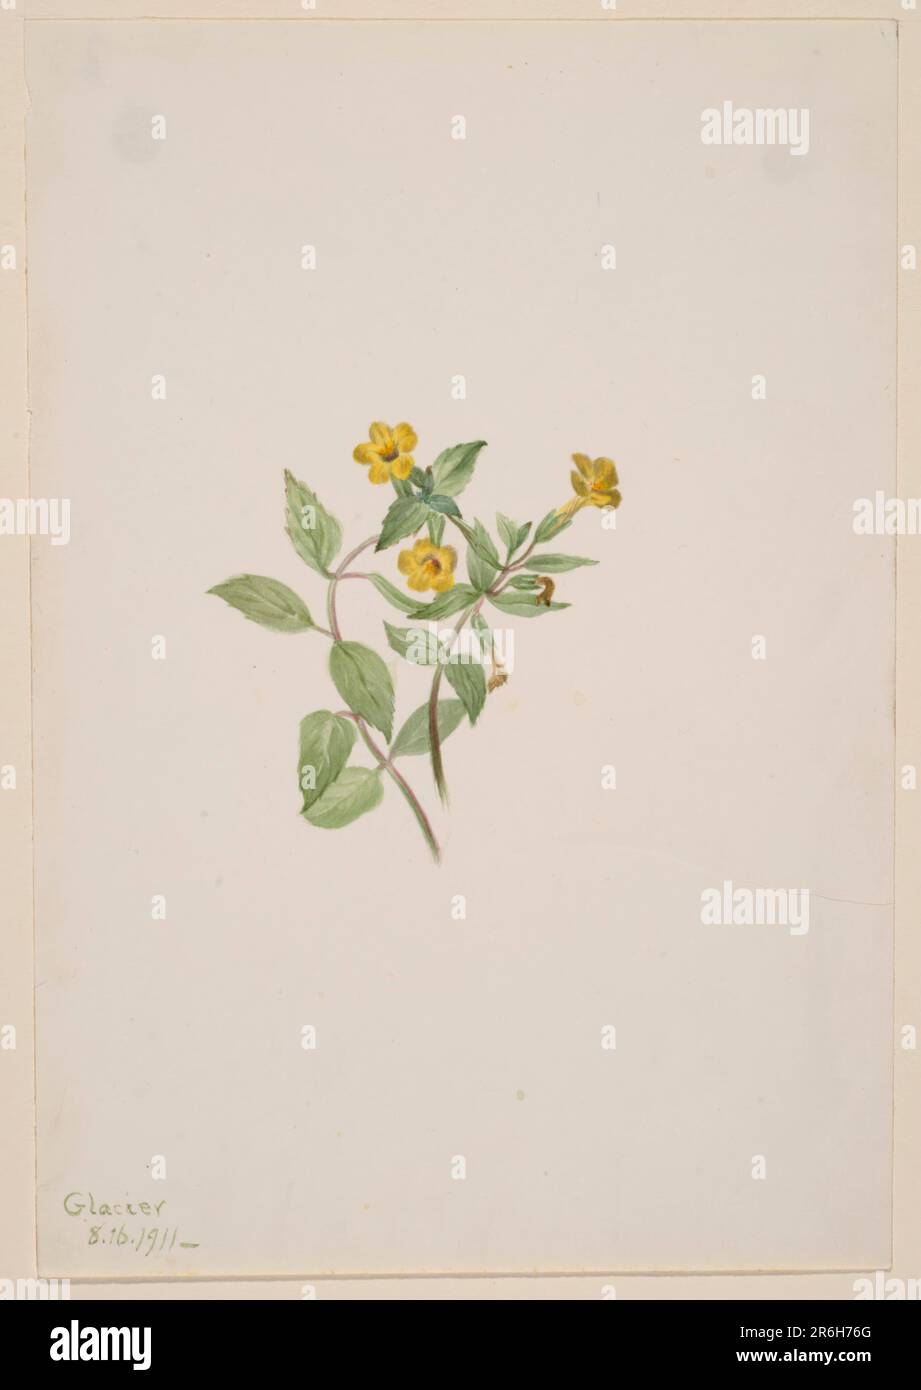 Musk-Flower (Mimulus moschatus). Date: 1911. Watercolor on paper. Museum: Smithsonian American Art Museum. Stock Photo